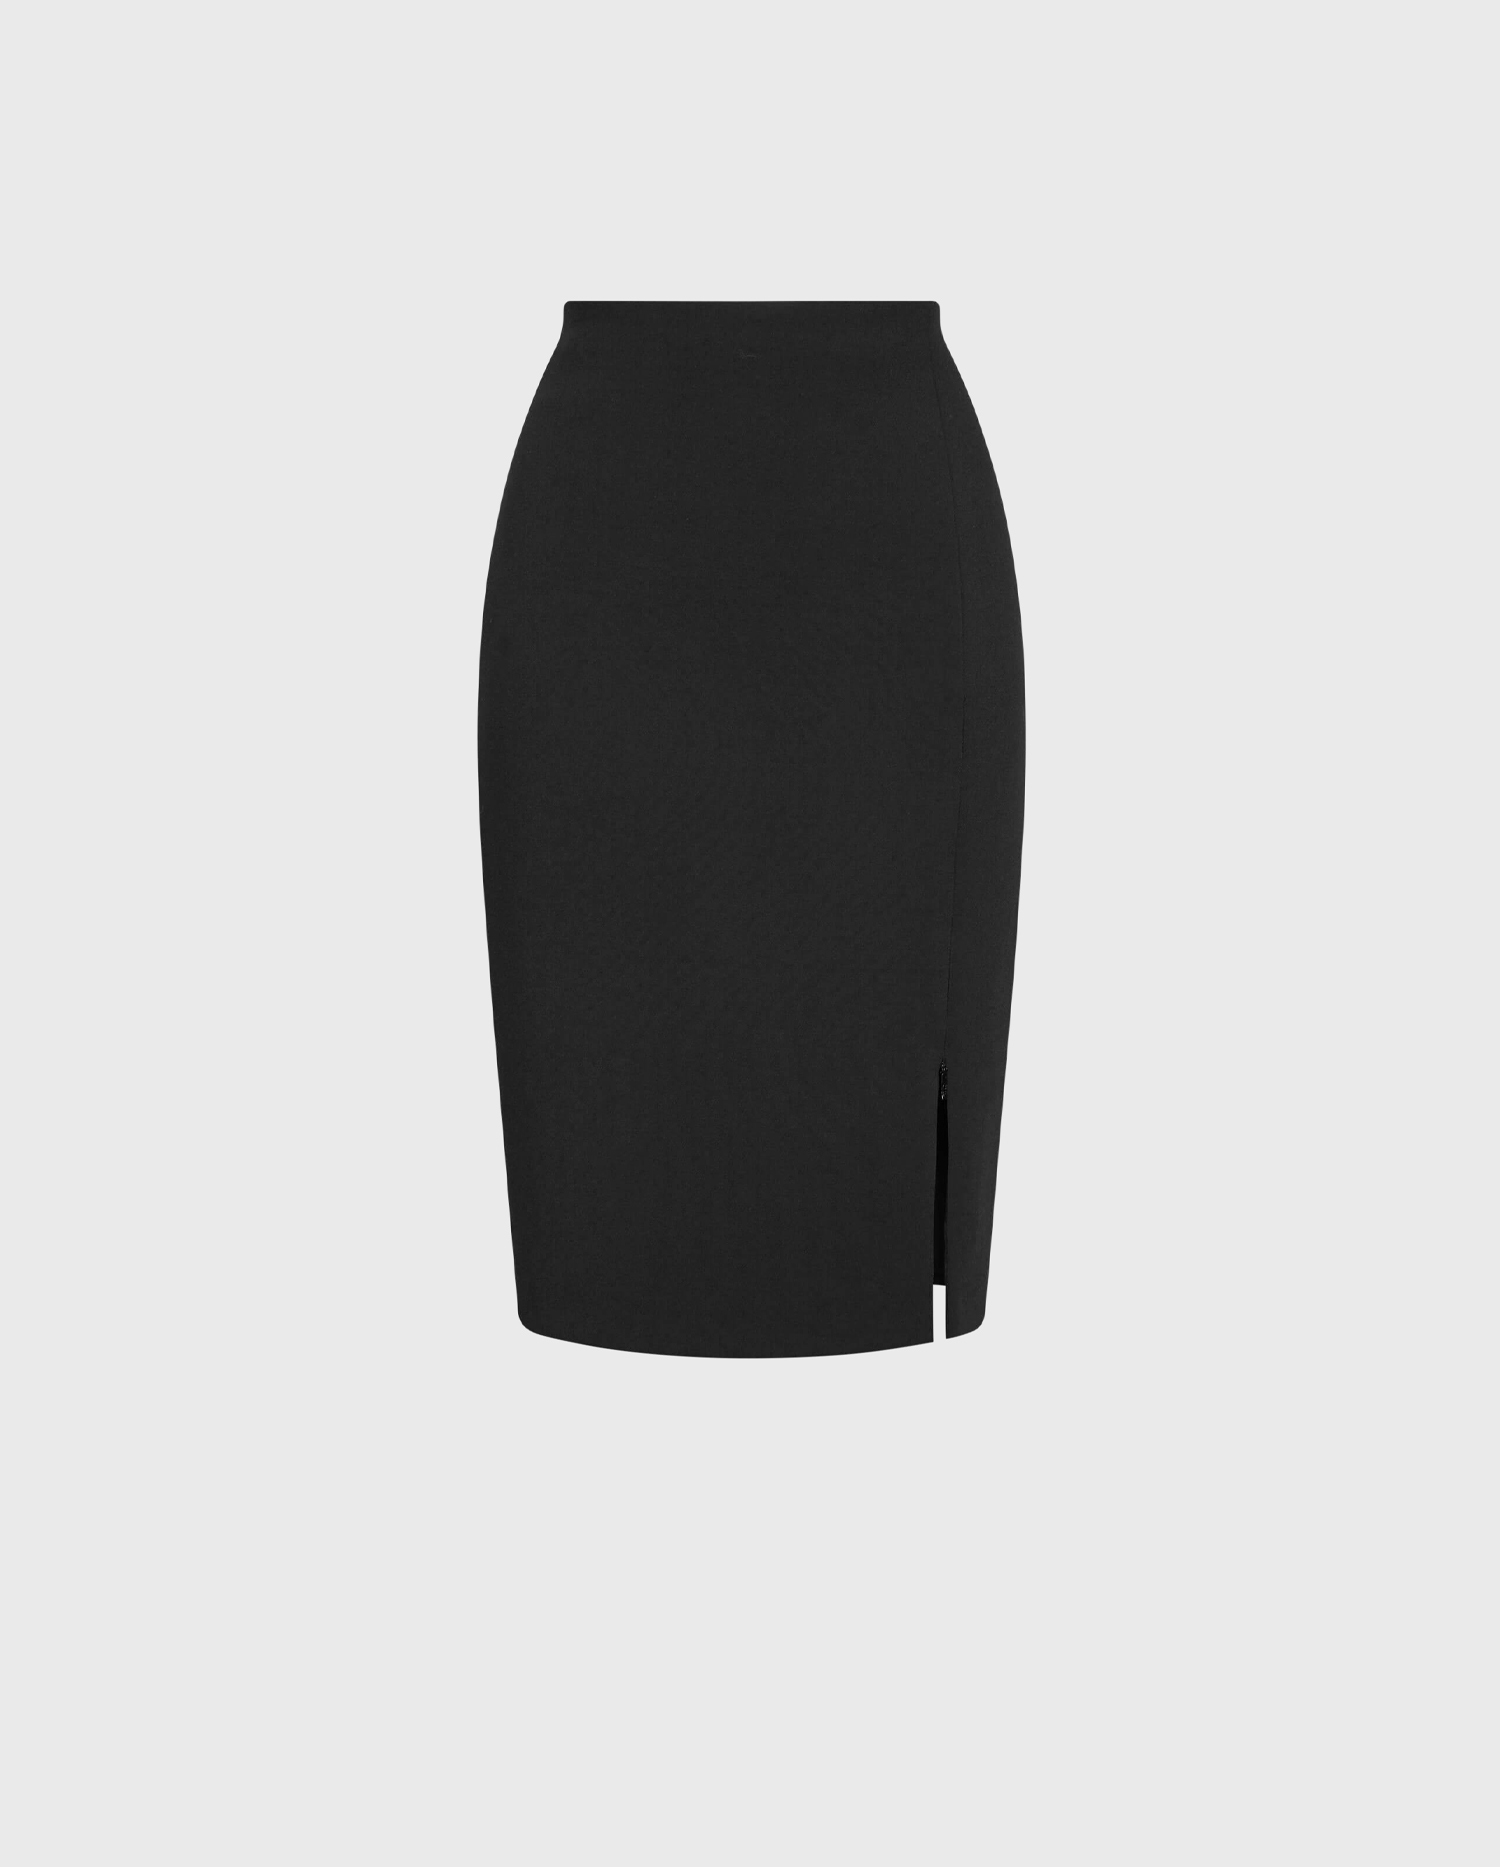 Disocver the ABELLA Thick Black Crepe Skirt With Zippered Slit